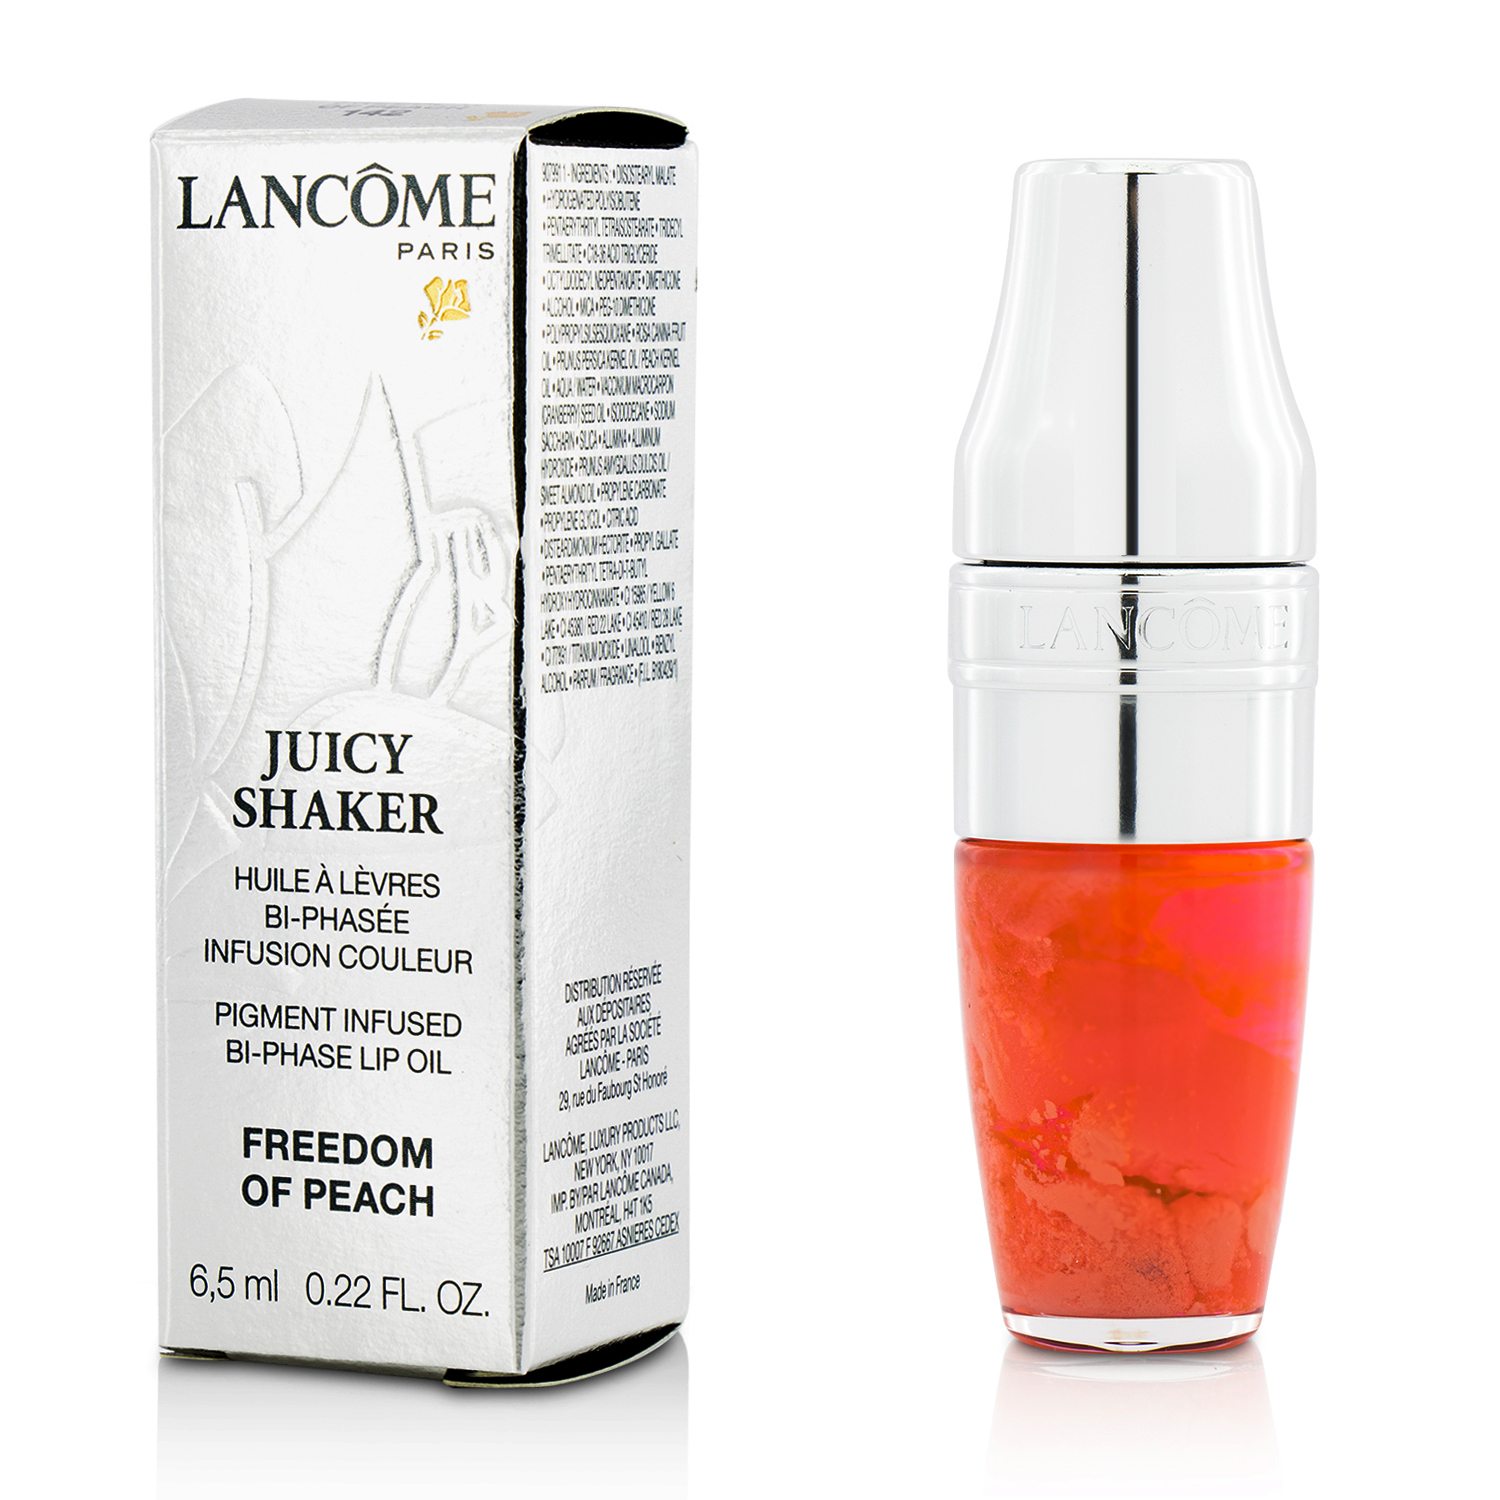 Juicy Shaker Pigment Infused Bi Phase Lip Oil - #142 Freedom of Peach Lancome Image